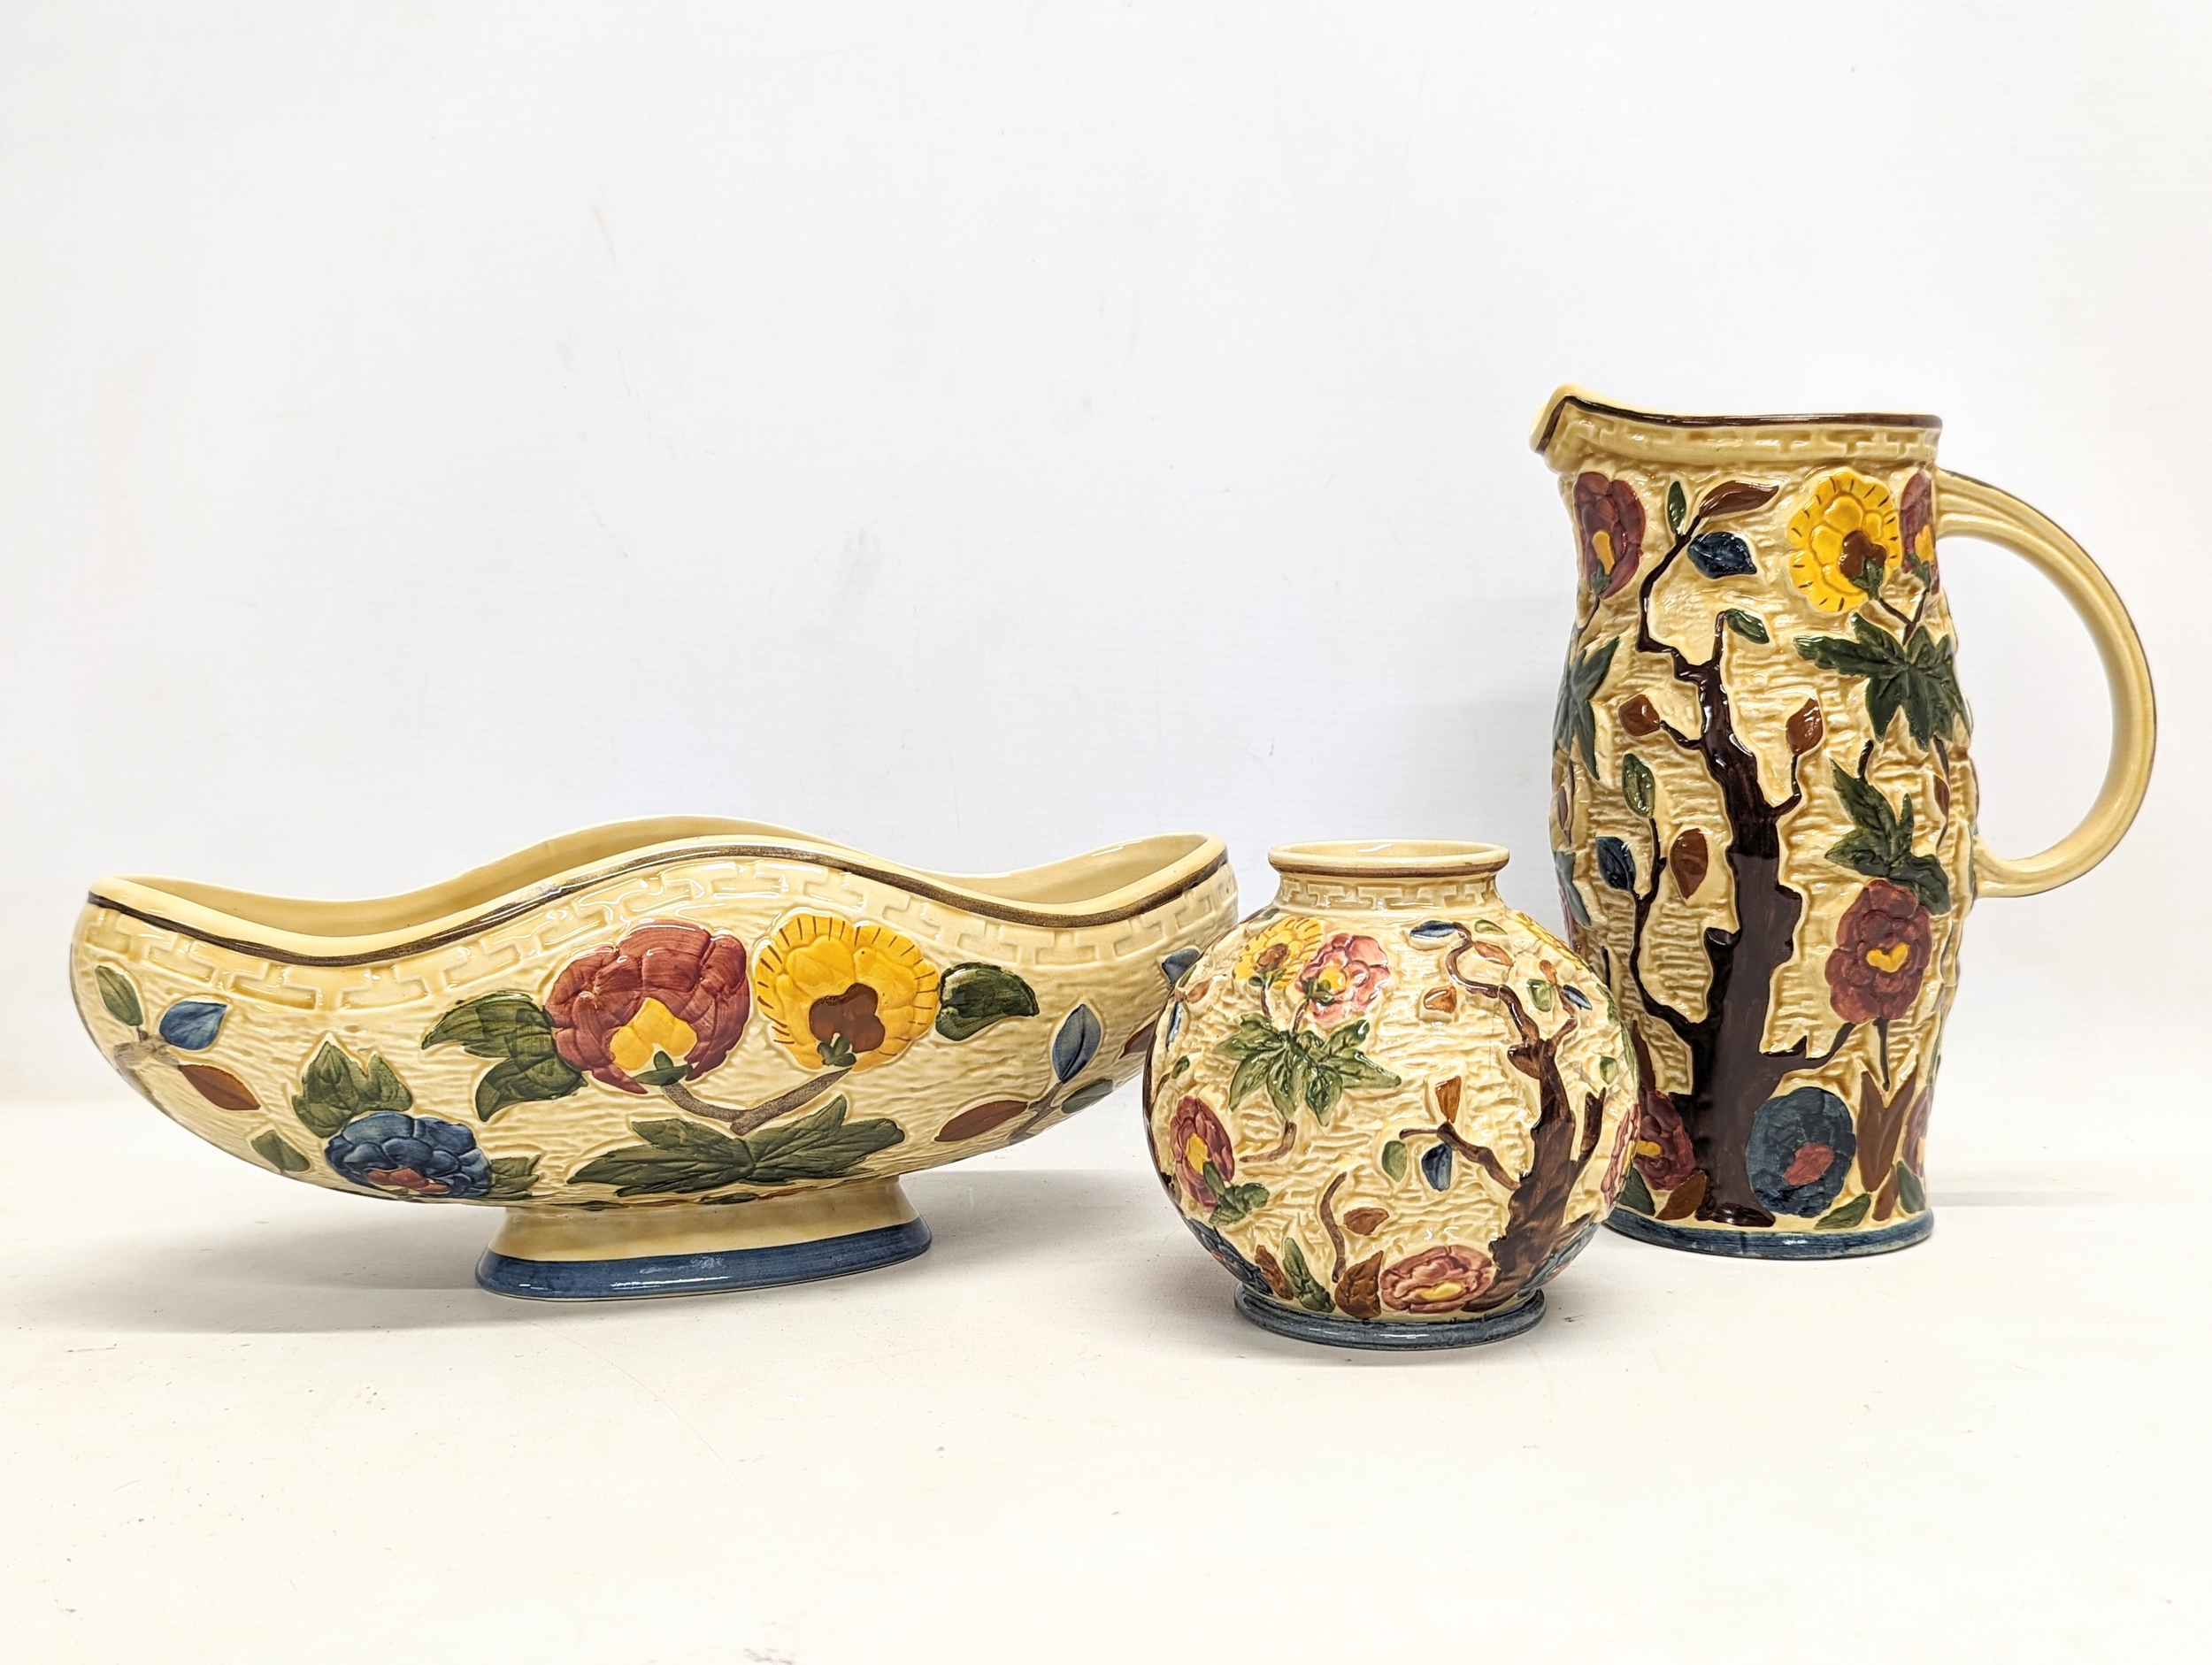 3 hand painted pieces of H. J. Wood 'Indian Tree' pottery, including jug,  vase, and jardinière. Jug